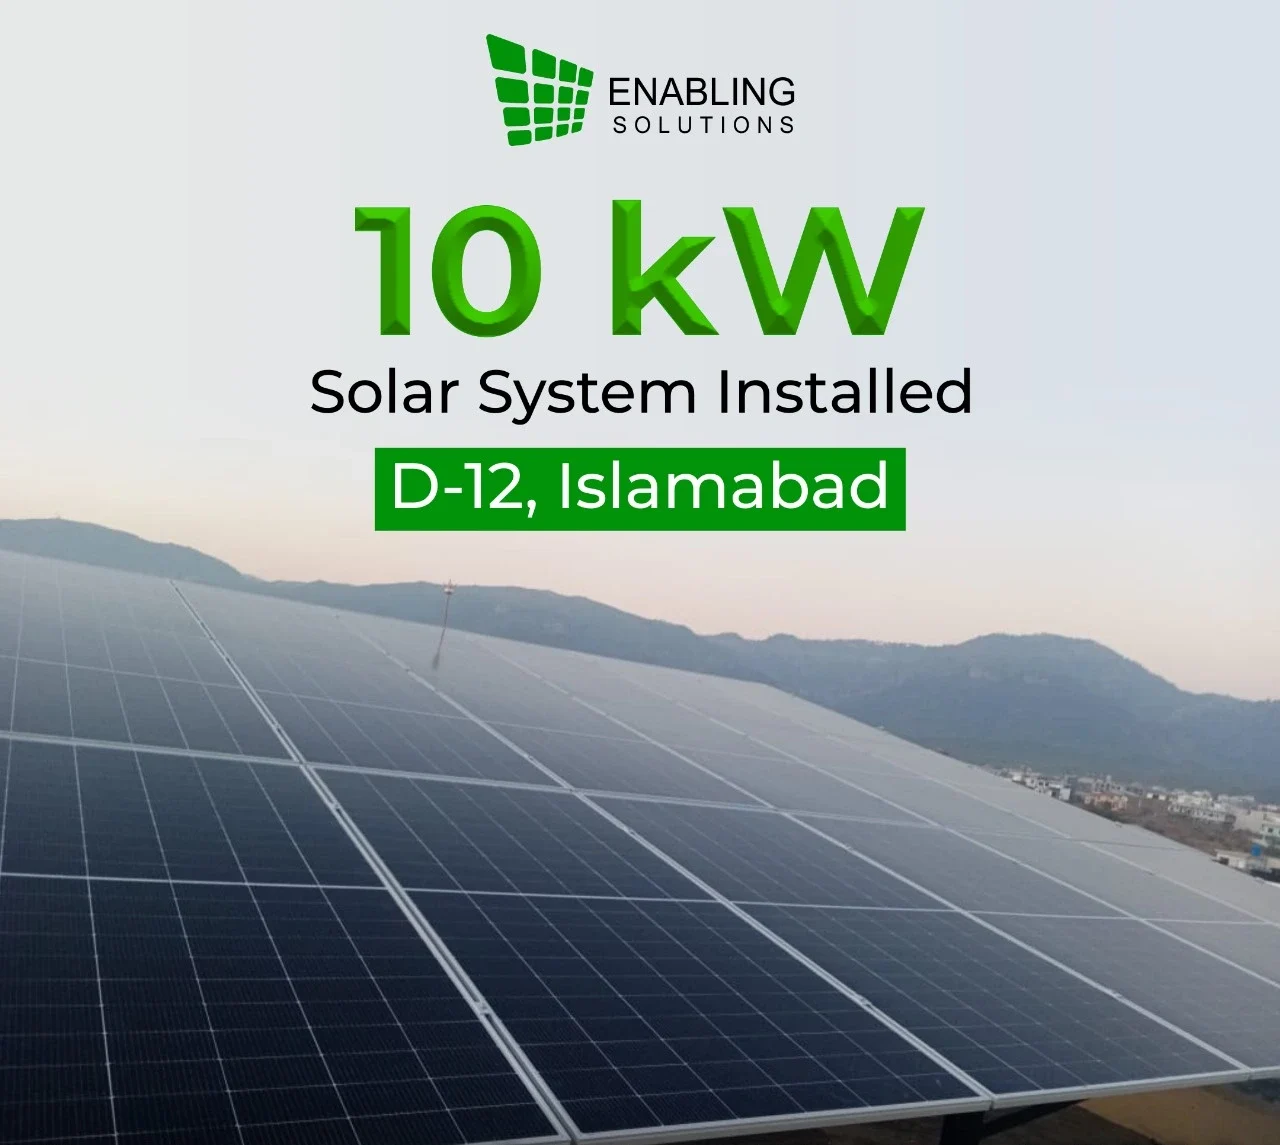 10 kw on grid solar system at d-12, Islamabad